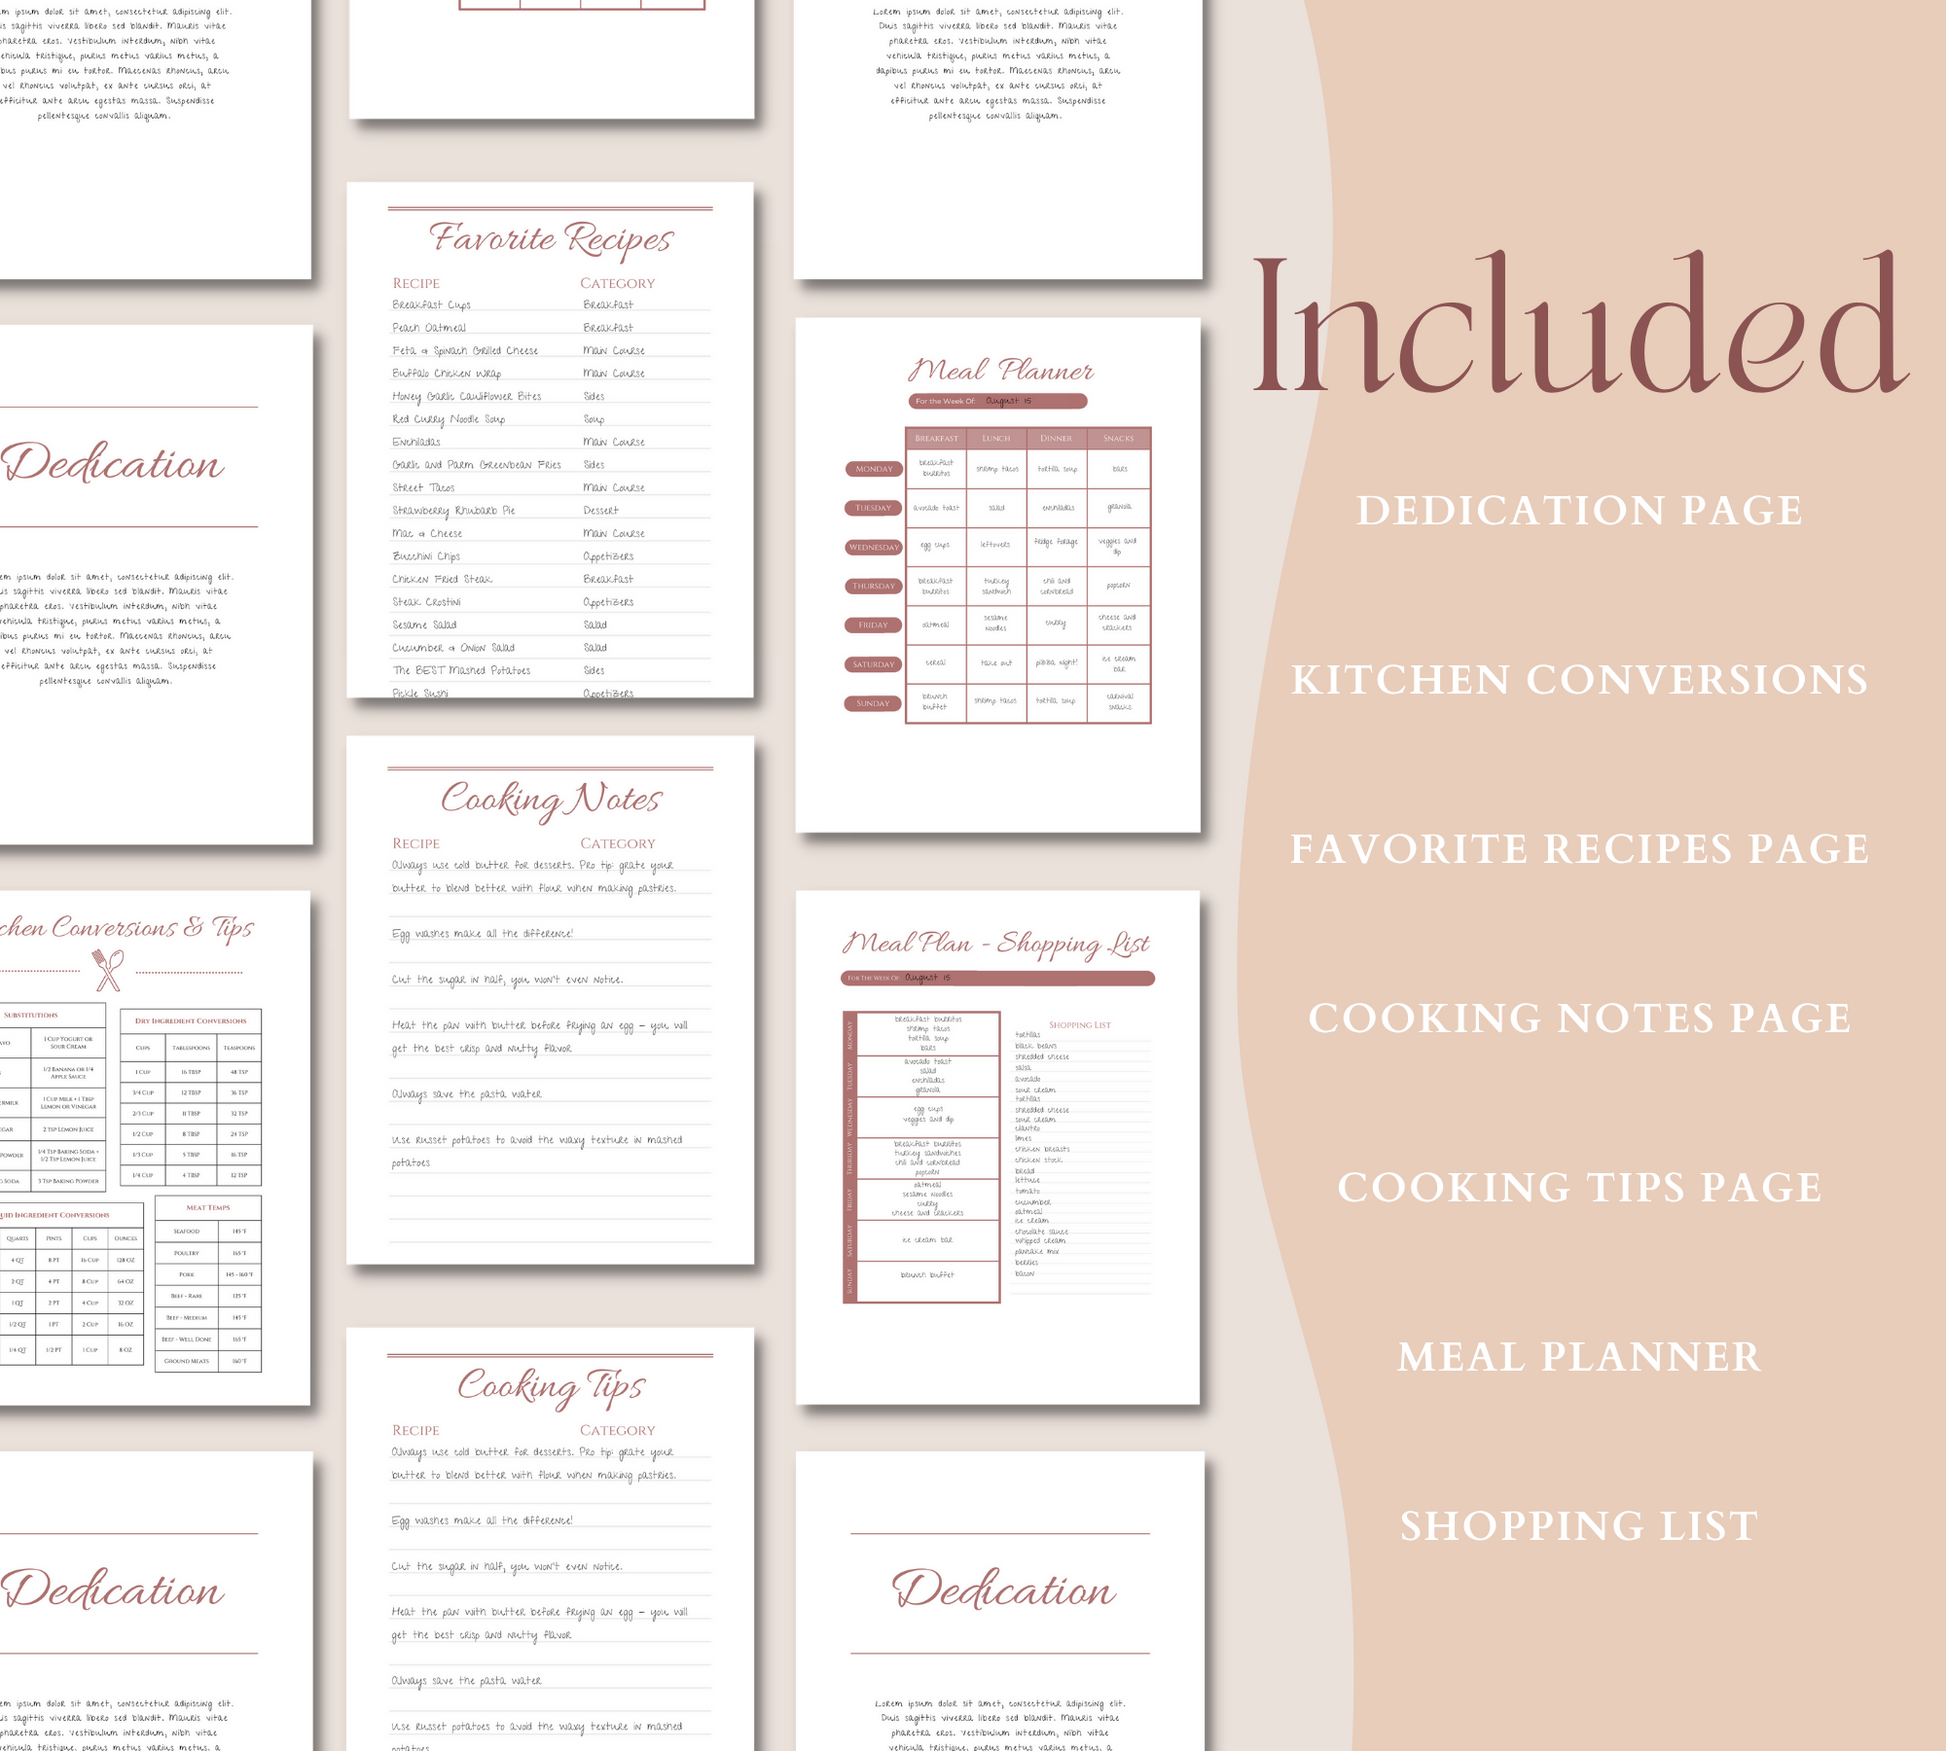 Printable cookbook features listed with pictures of each